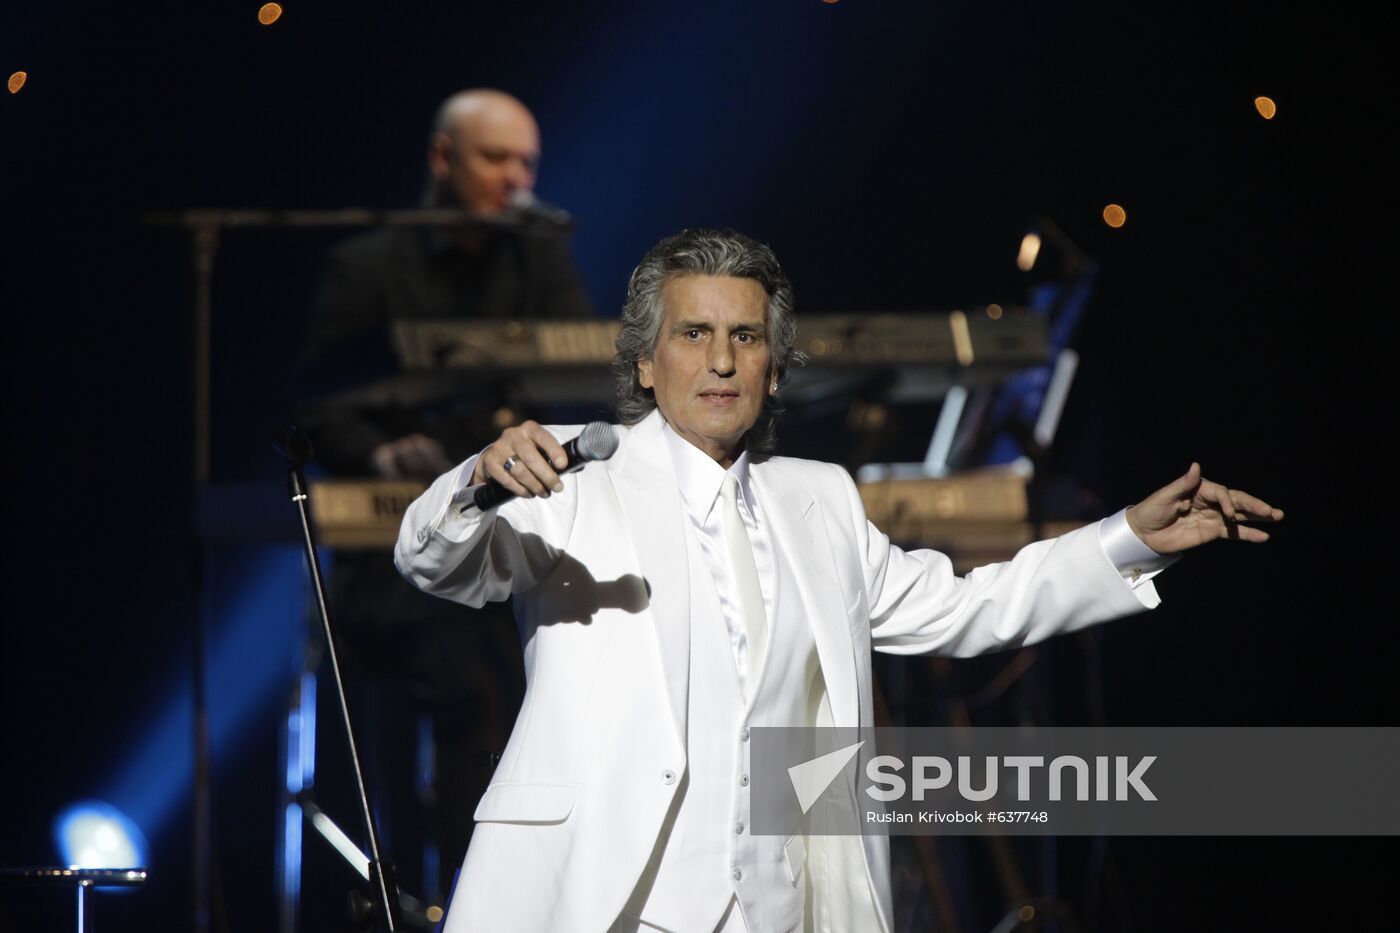 Toto Cutugno gives concert in Moscow